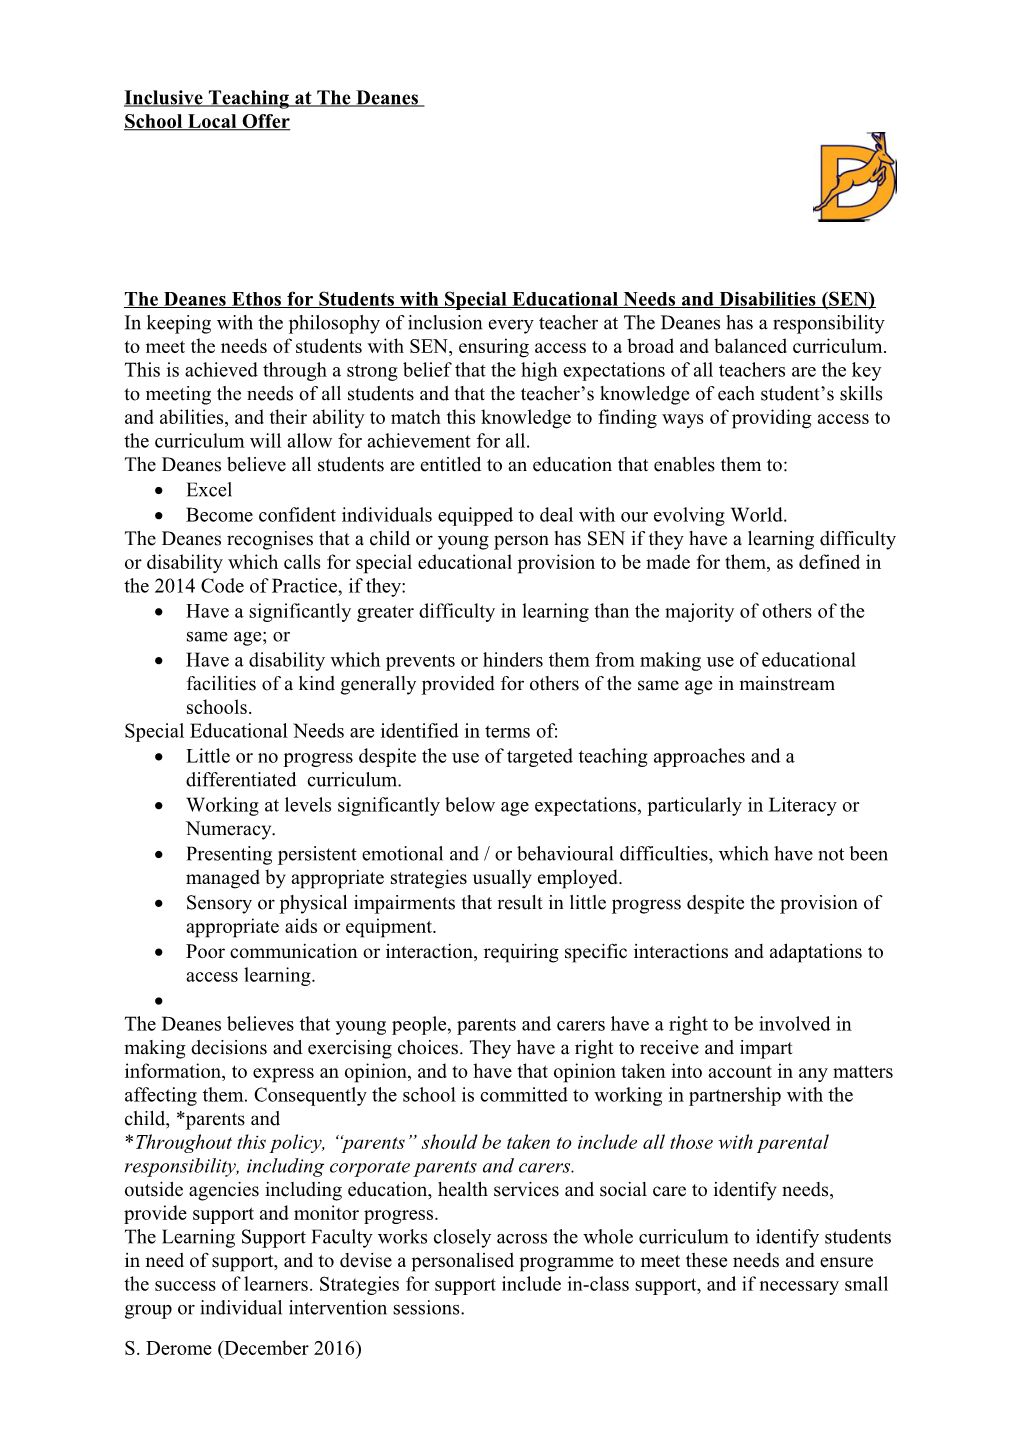 The Deanes Ethos for Students with Special Educational Needs and Disabilities (SEN)